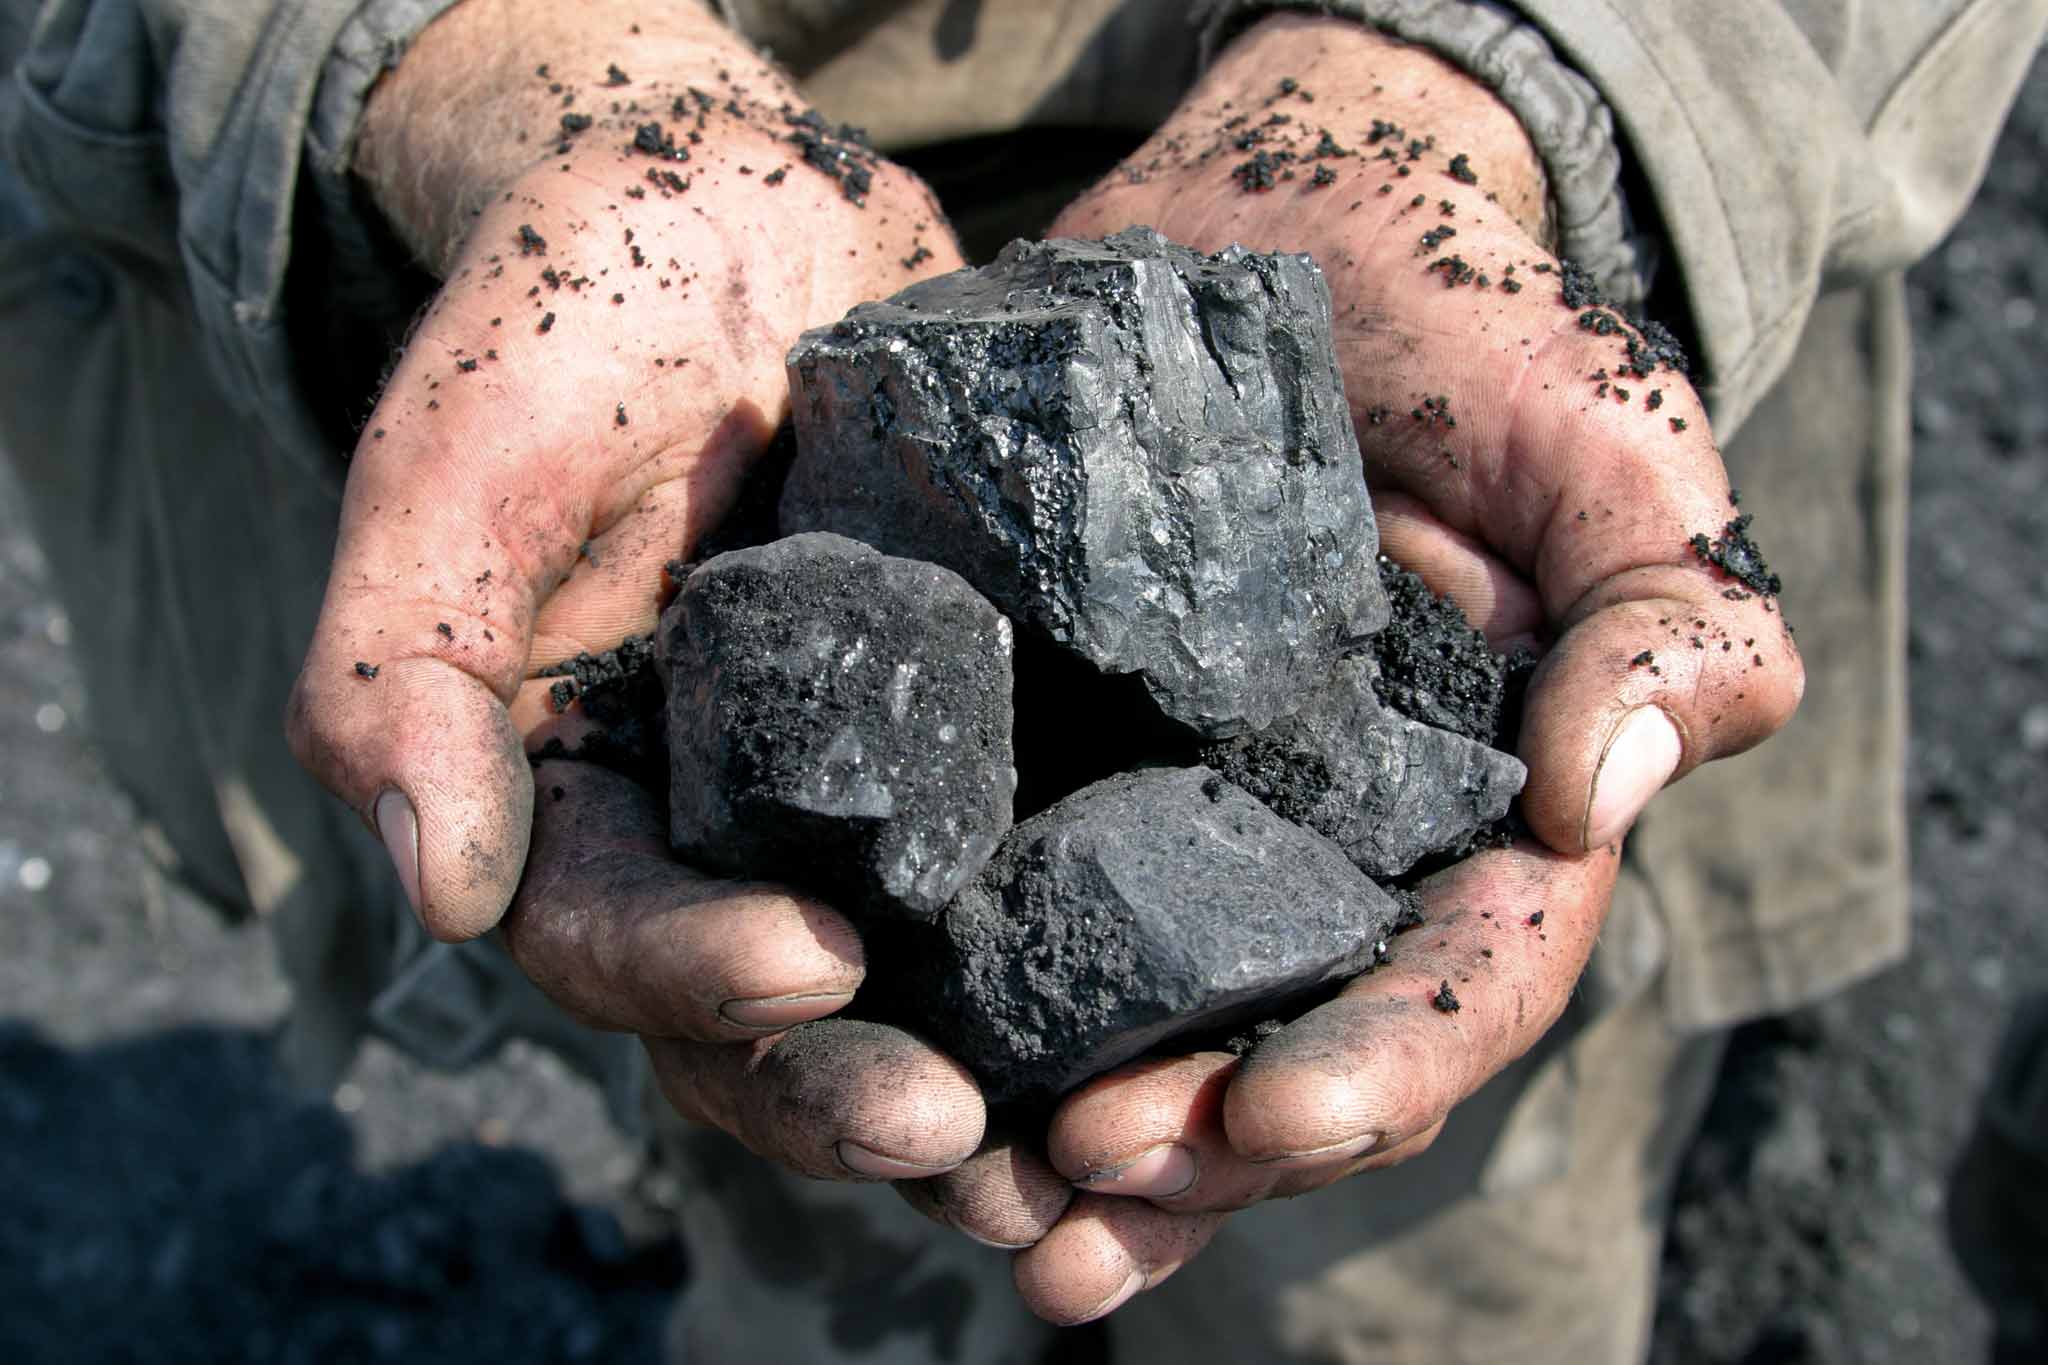 The picture shows two hands holding rocks from mining.